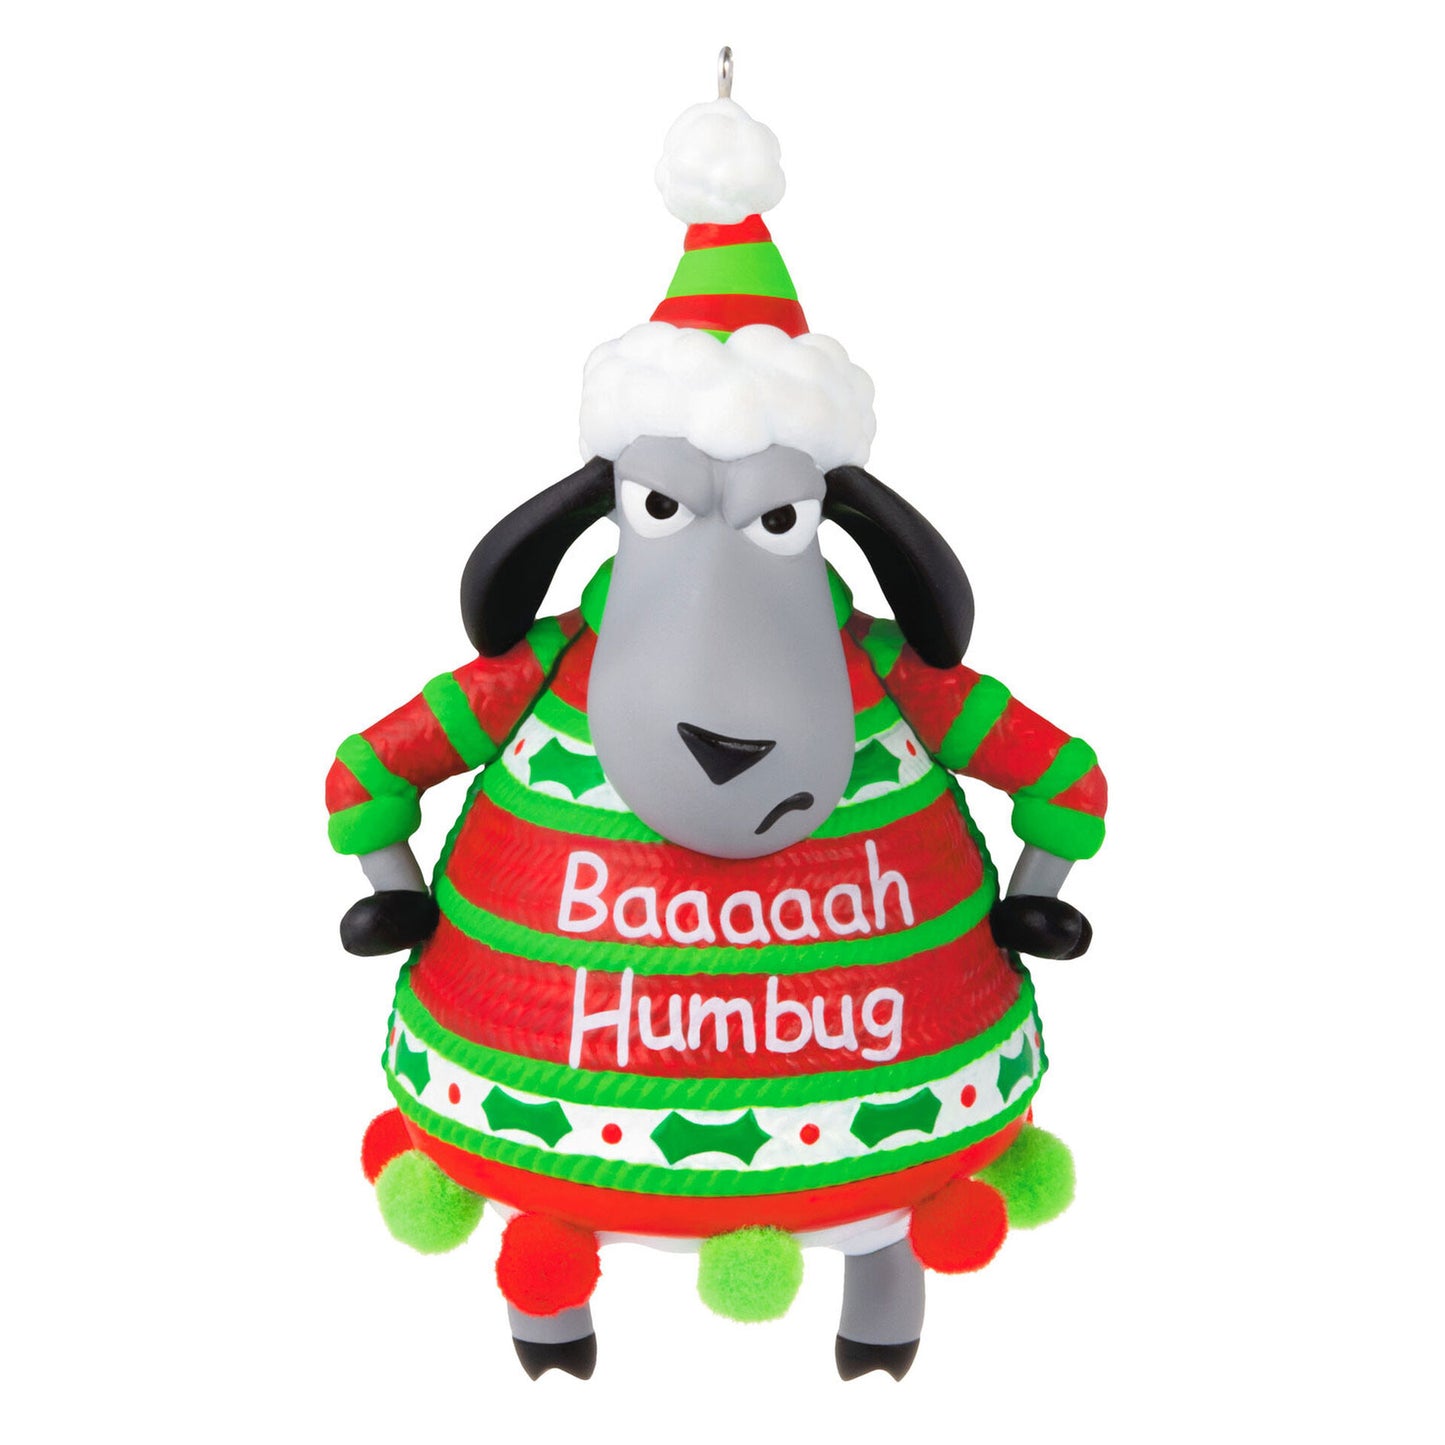 Christmas ornament of a grey sheep looking grumpy wearing a green and red hat and a green and red sweater that reads "Baaaaah Humbug" and is adorned with red and green puff balls along the bottom. 